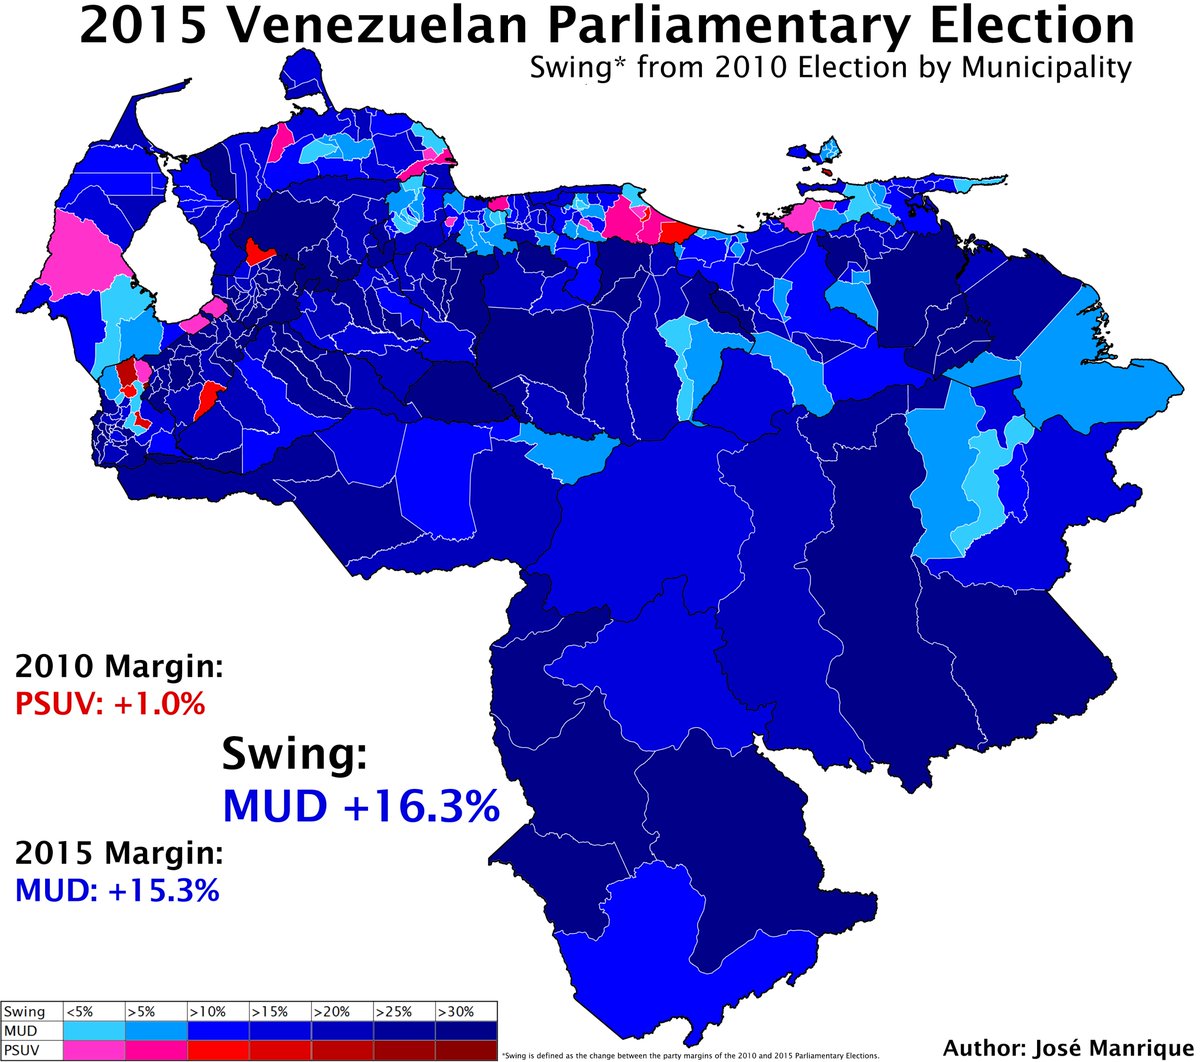 The swing map by municipality also shows big gains for the MUD almost everywhere, except in some odd municipalities. Here's a comparison between the 2010 Parliamentary election *and* the 2013 Presidential election (which also had a similar margin to the 2010 election).